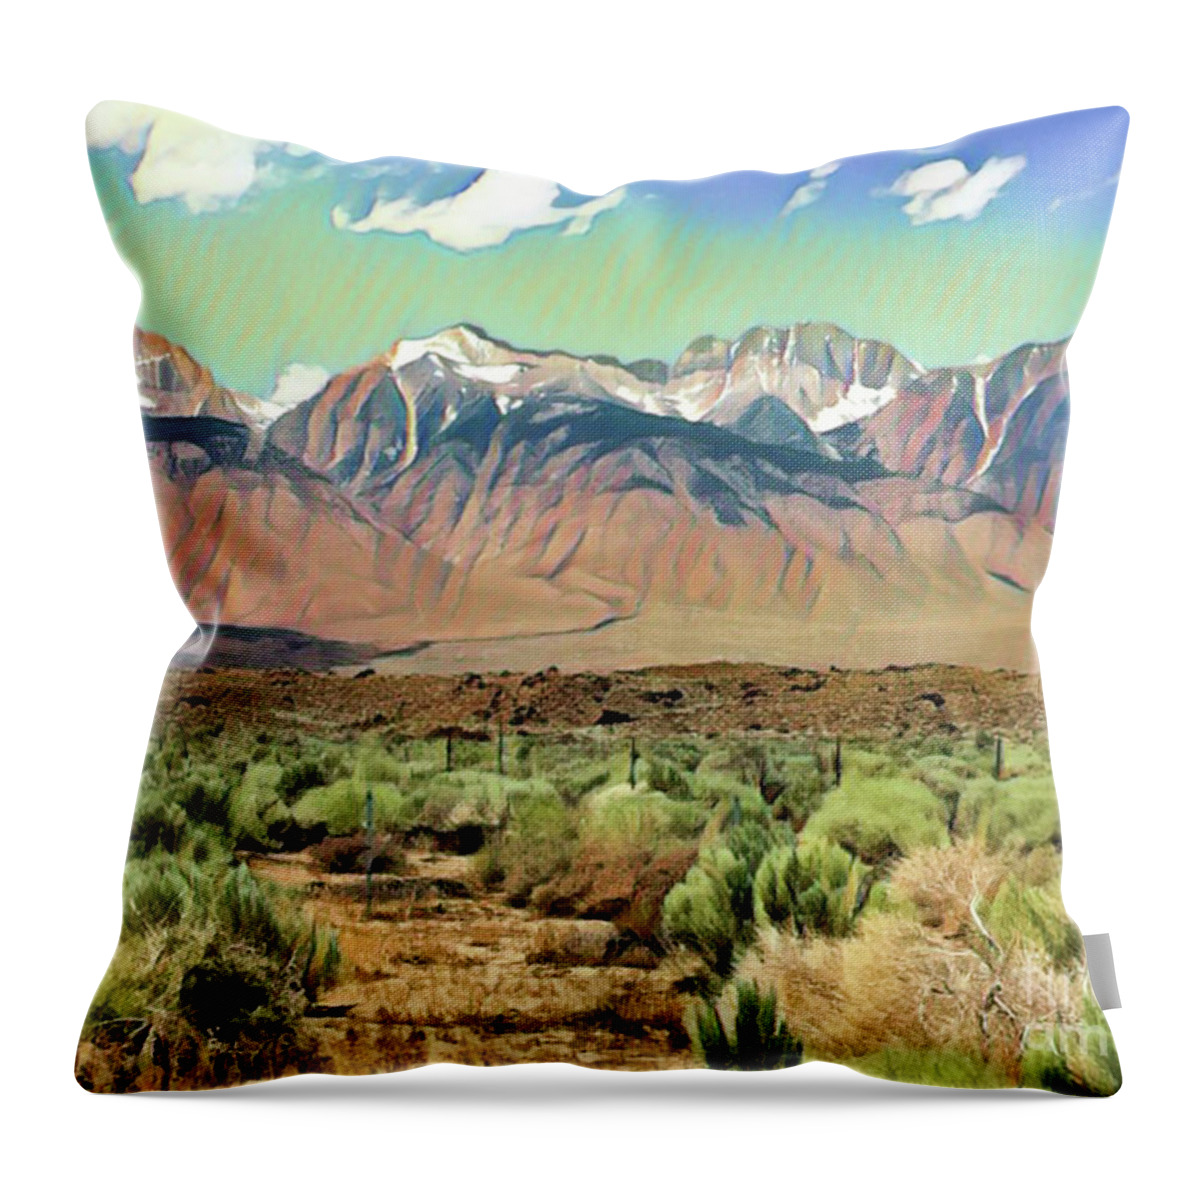 Mountains Throw Pillow featuring the digital art Sierras I by Jackie MacNair